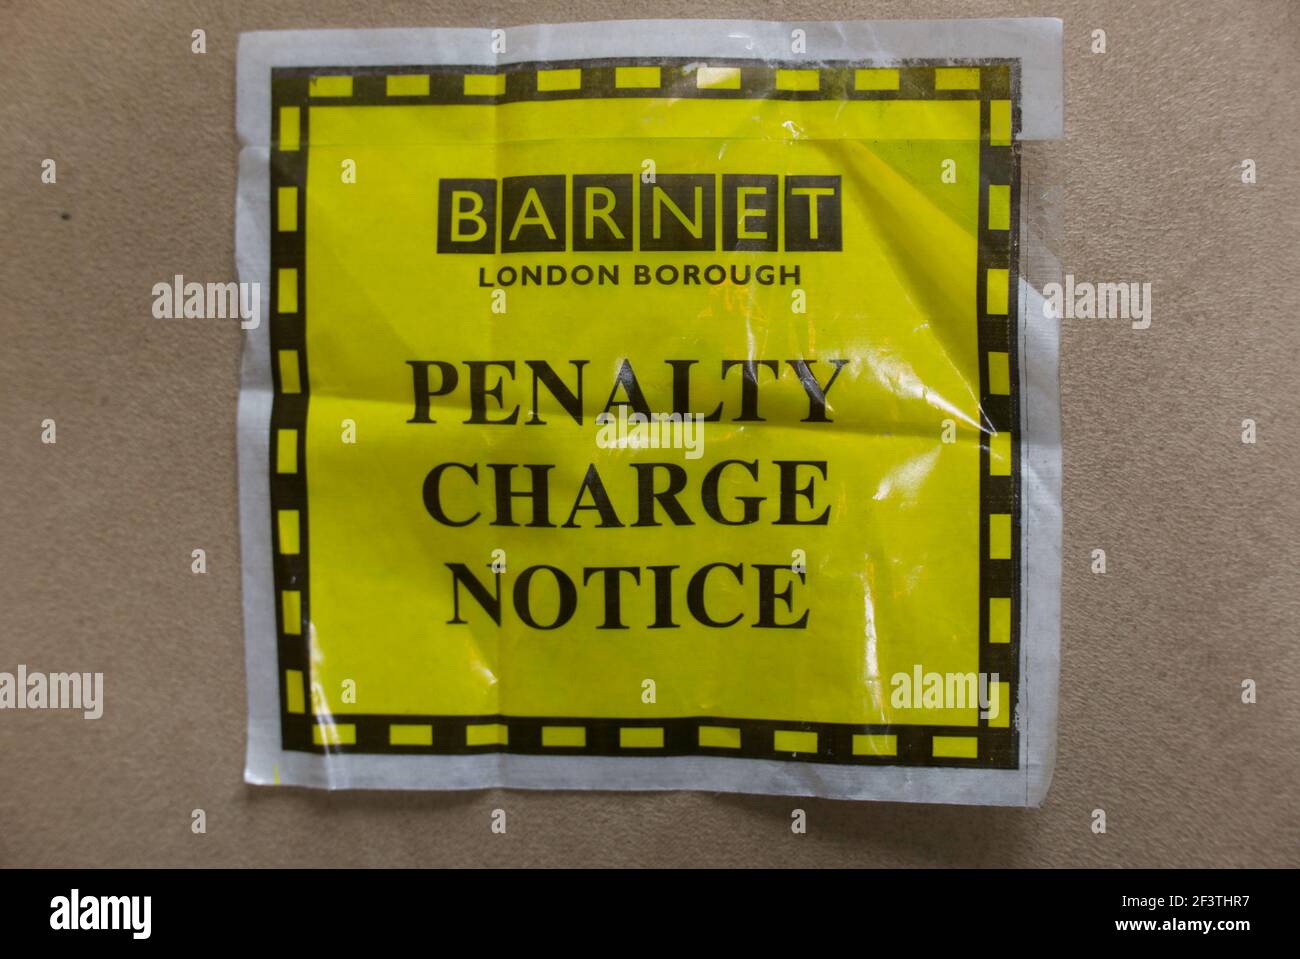 Penalty Charge Notice, London Stock Photo